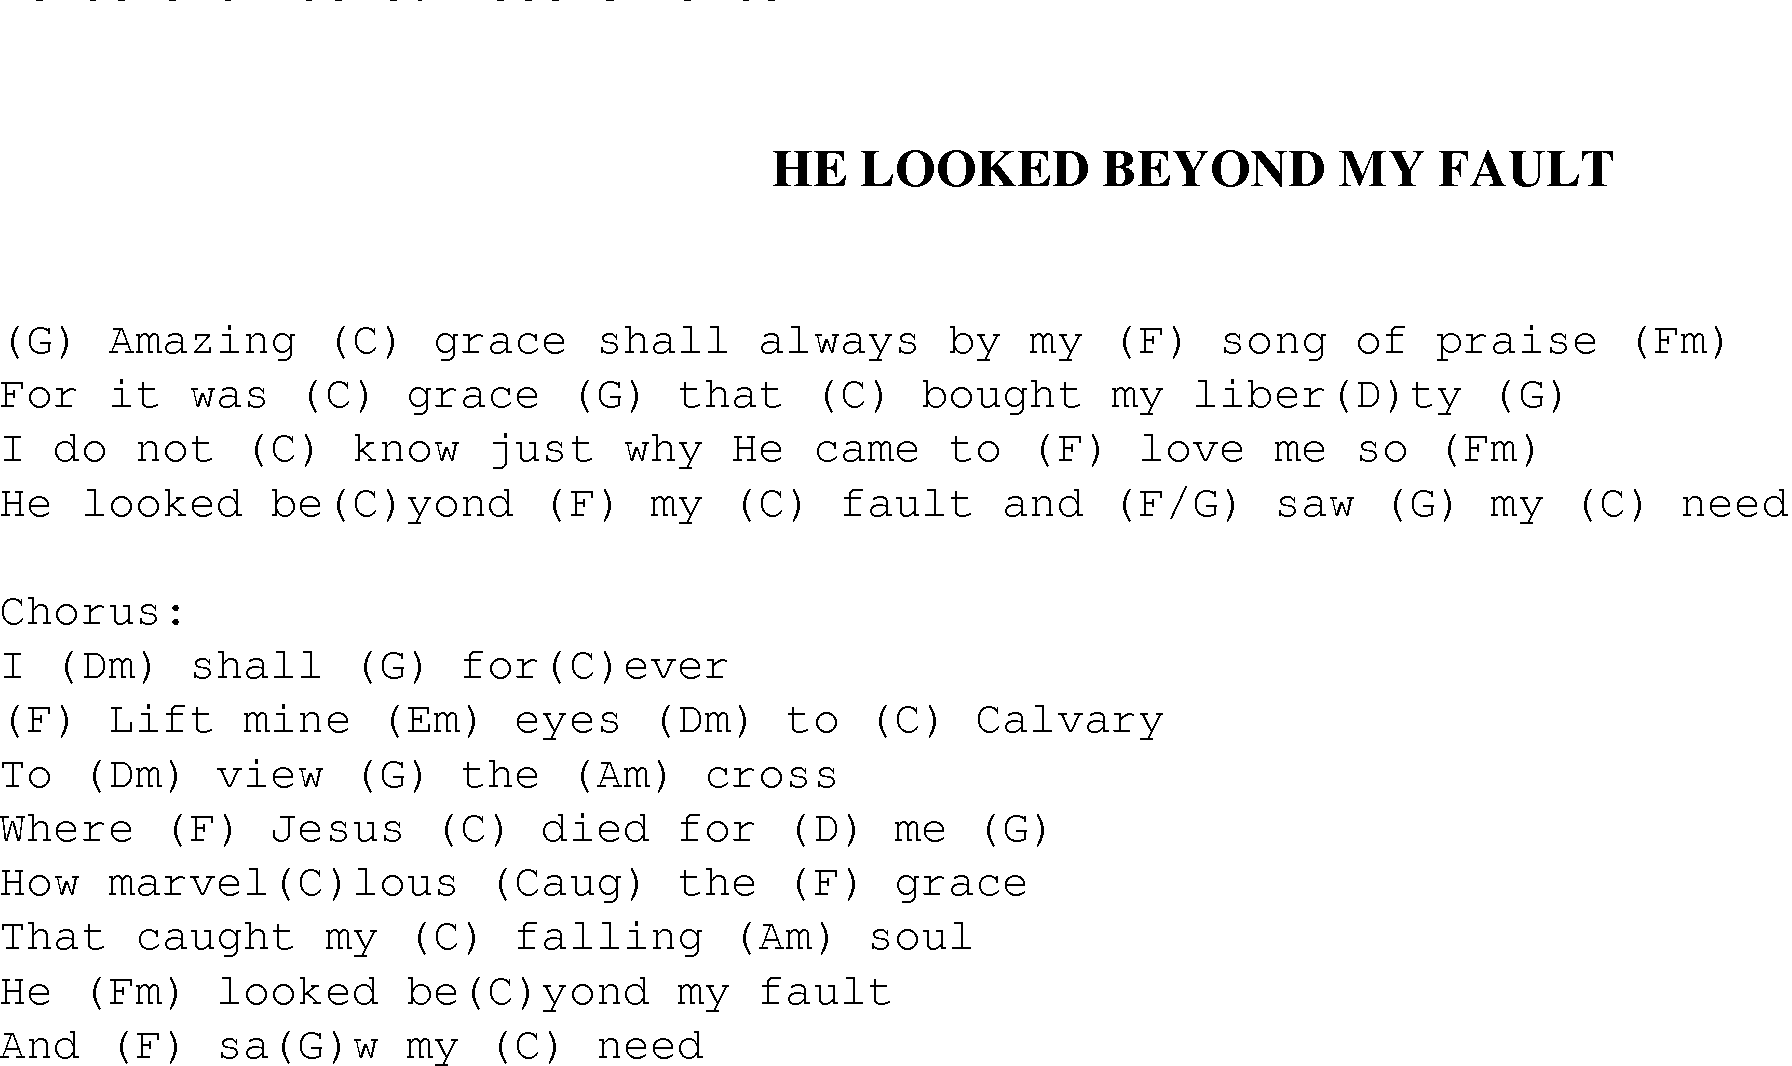 Gospel Song: he_looked_beyond_my_fault, lyrics and chords.